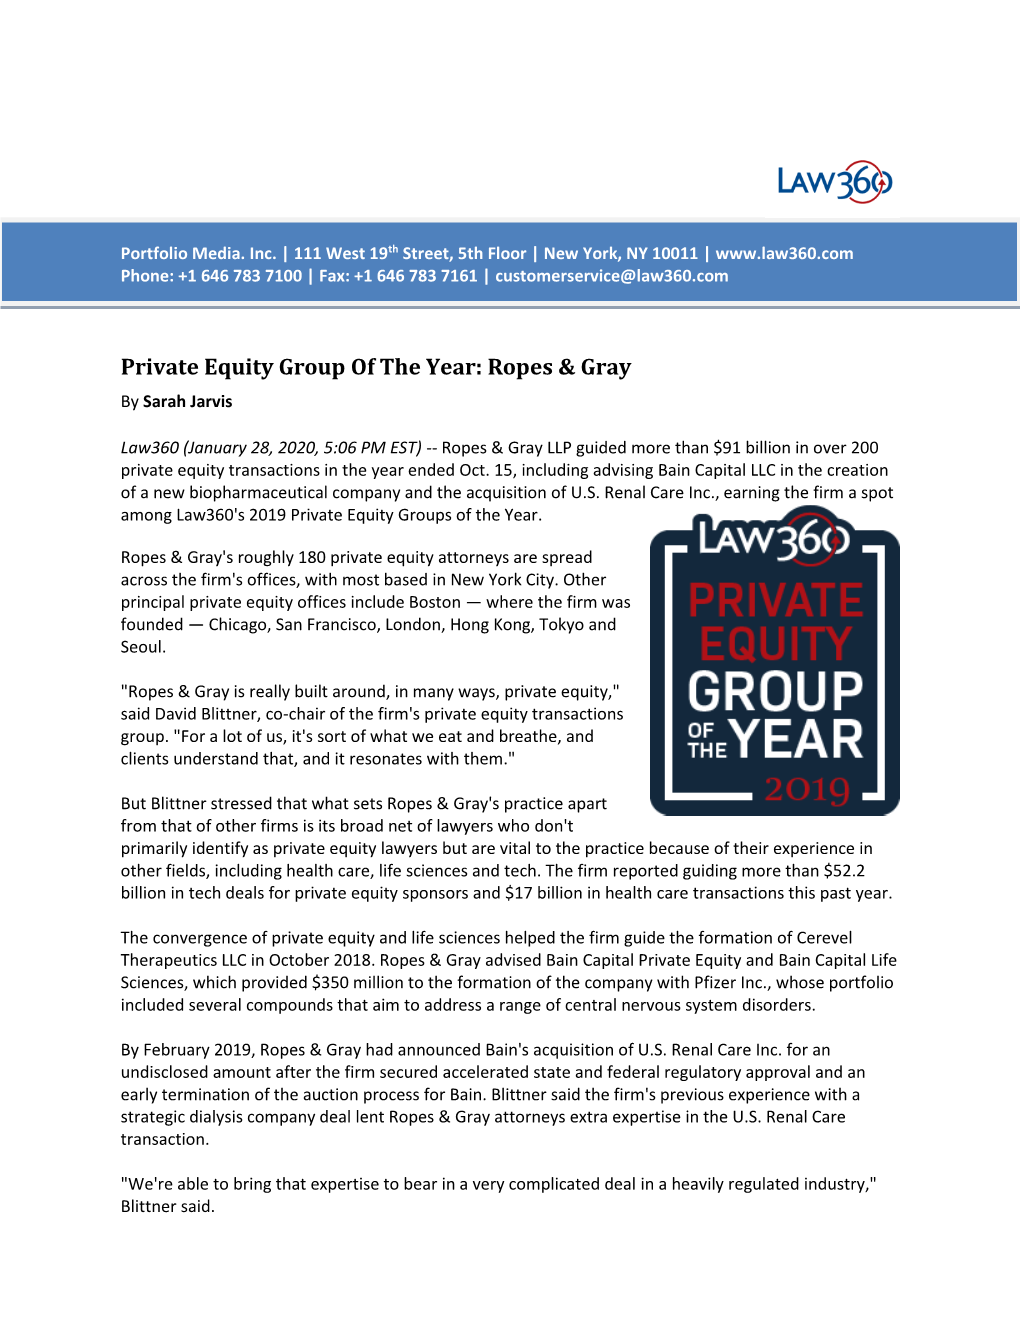 Private Equity Group of the Year: Ropes & Gray by Sarah Jarvis